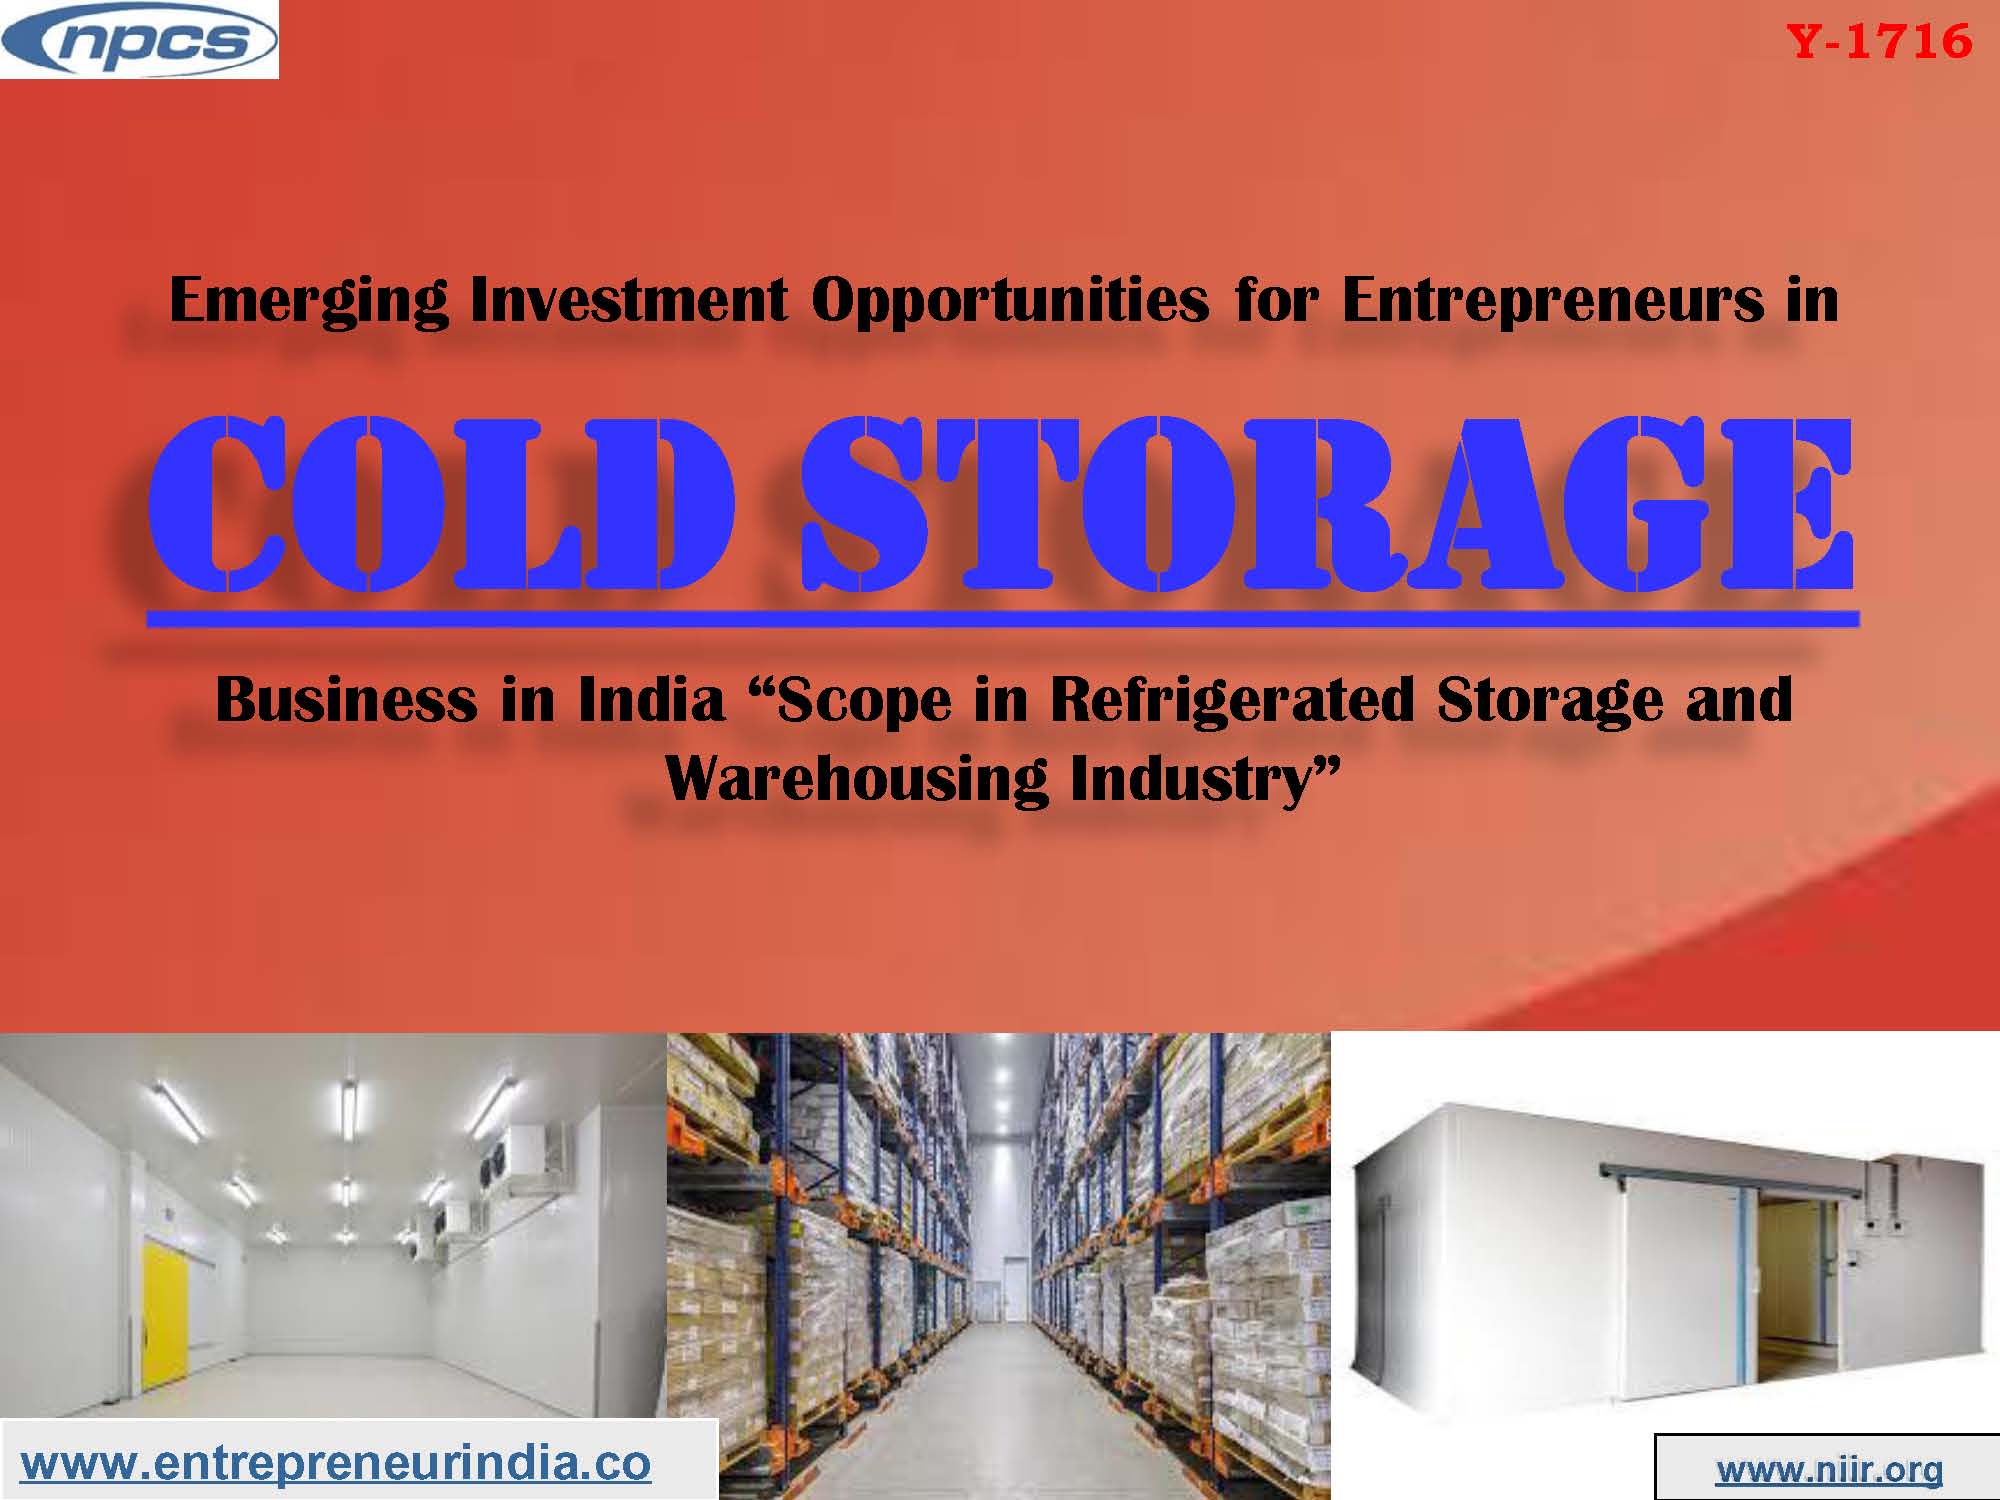 Emerging Investment Opportunities for Entrepreneurs in Cold Storage Business in India Scope in Refrigerated Storage and Warehousing Industry